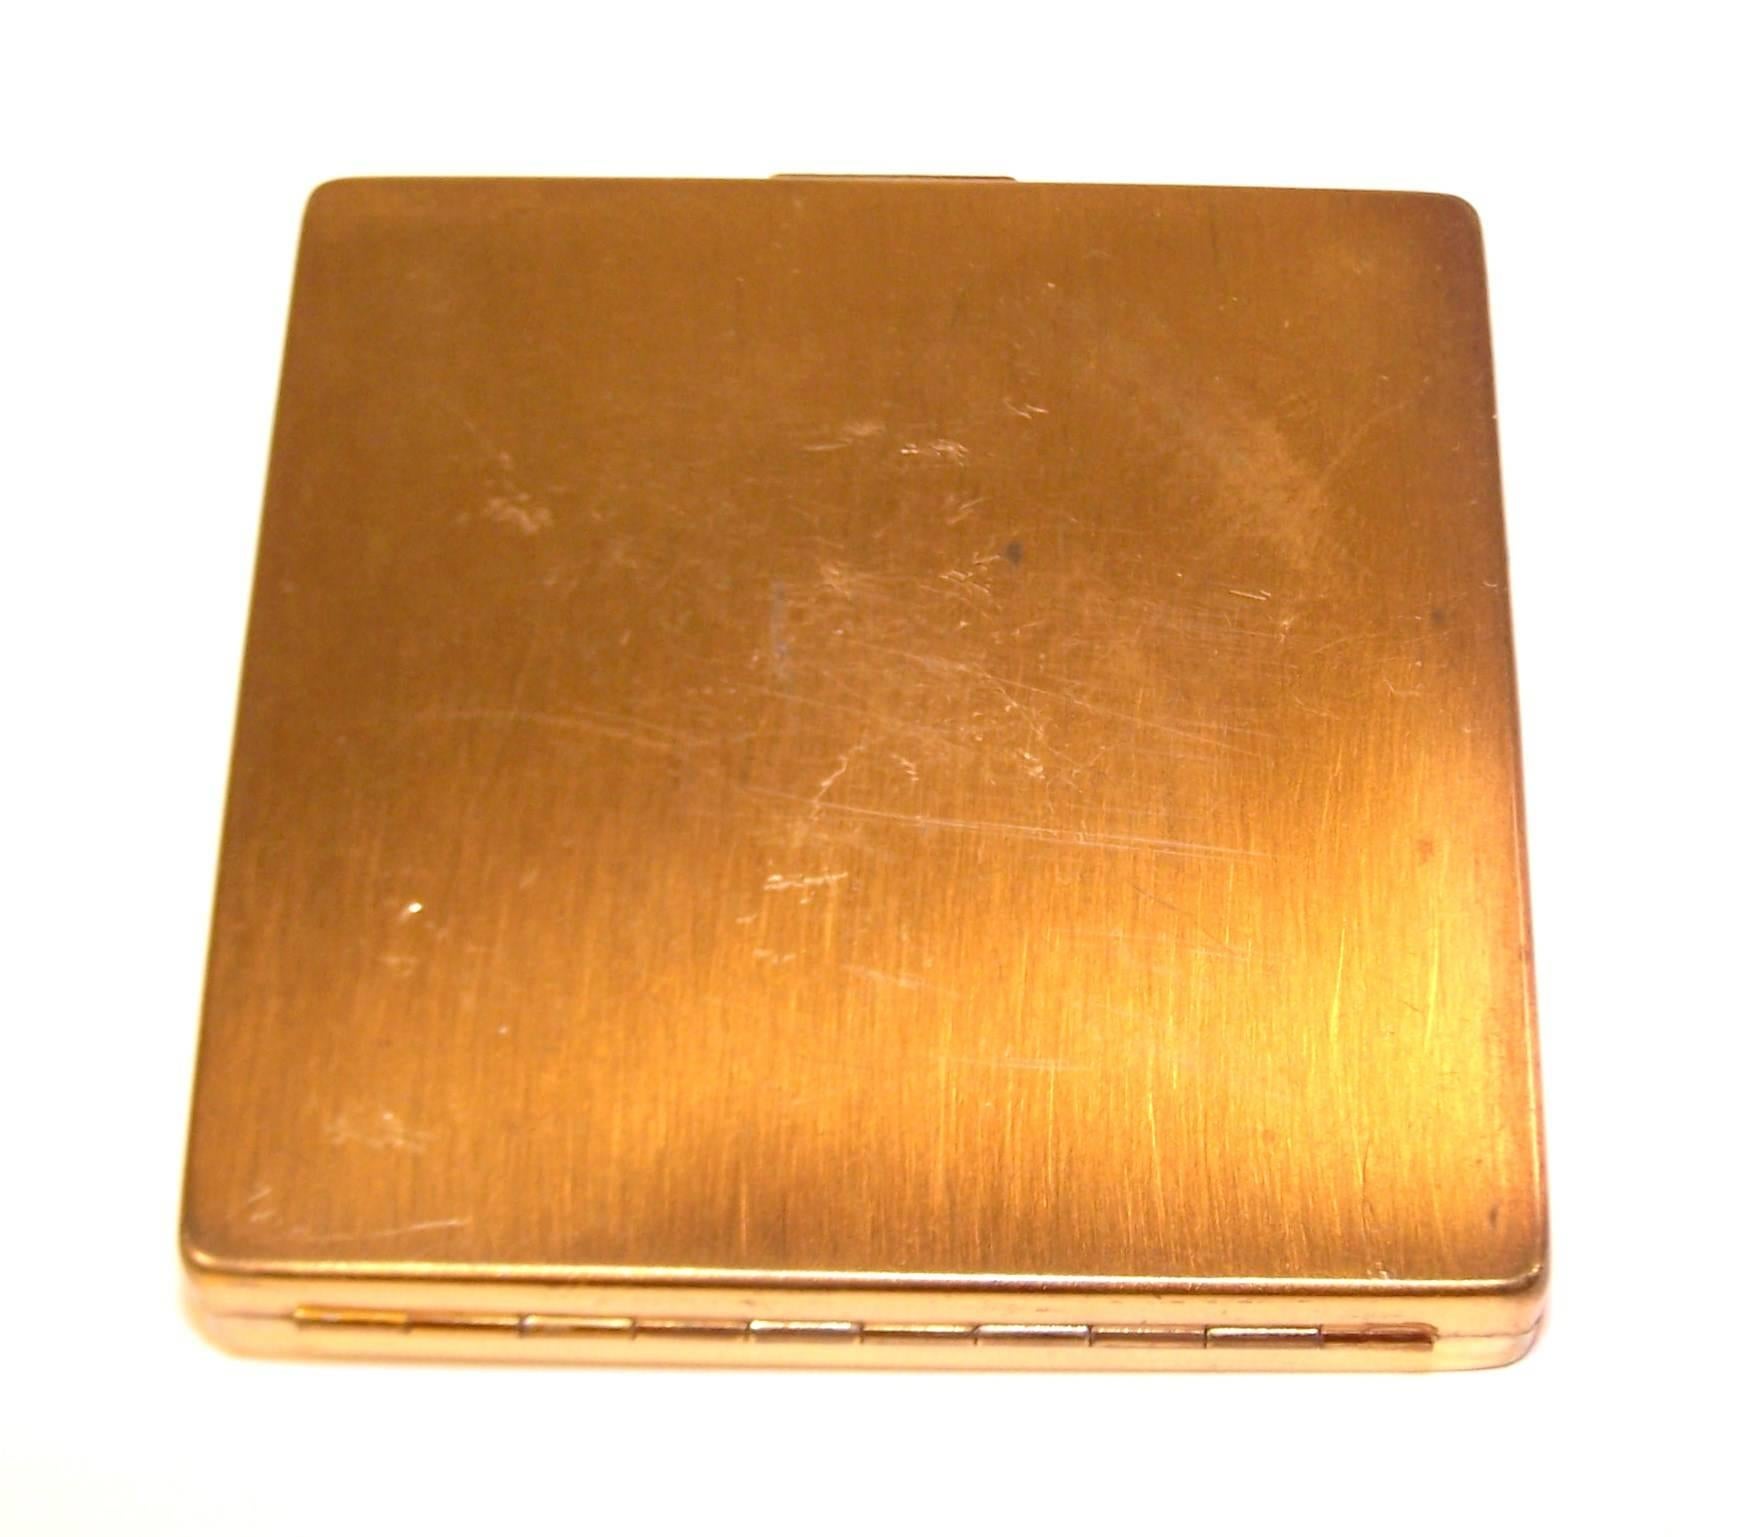 Women's Alligators Abound 1950's Ciner Leather Covered Powder Compact With Lipstick